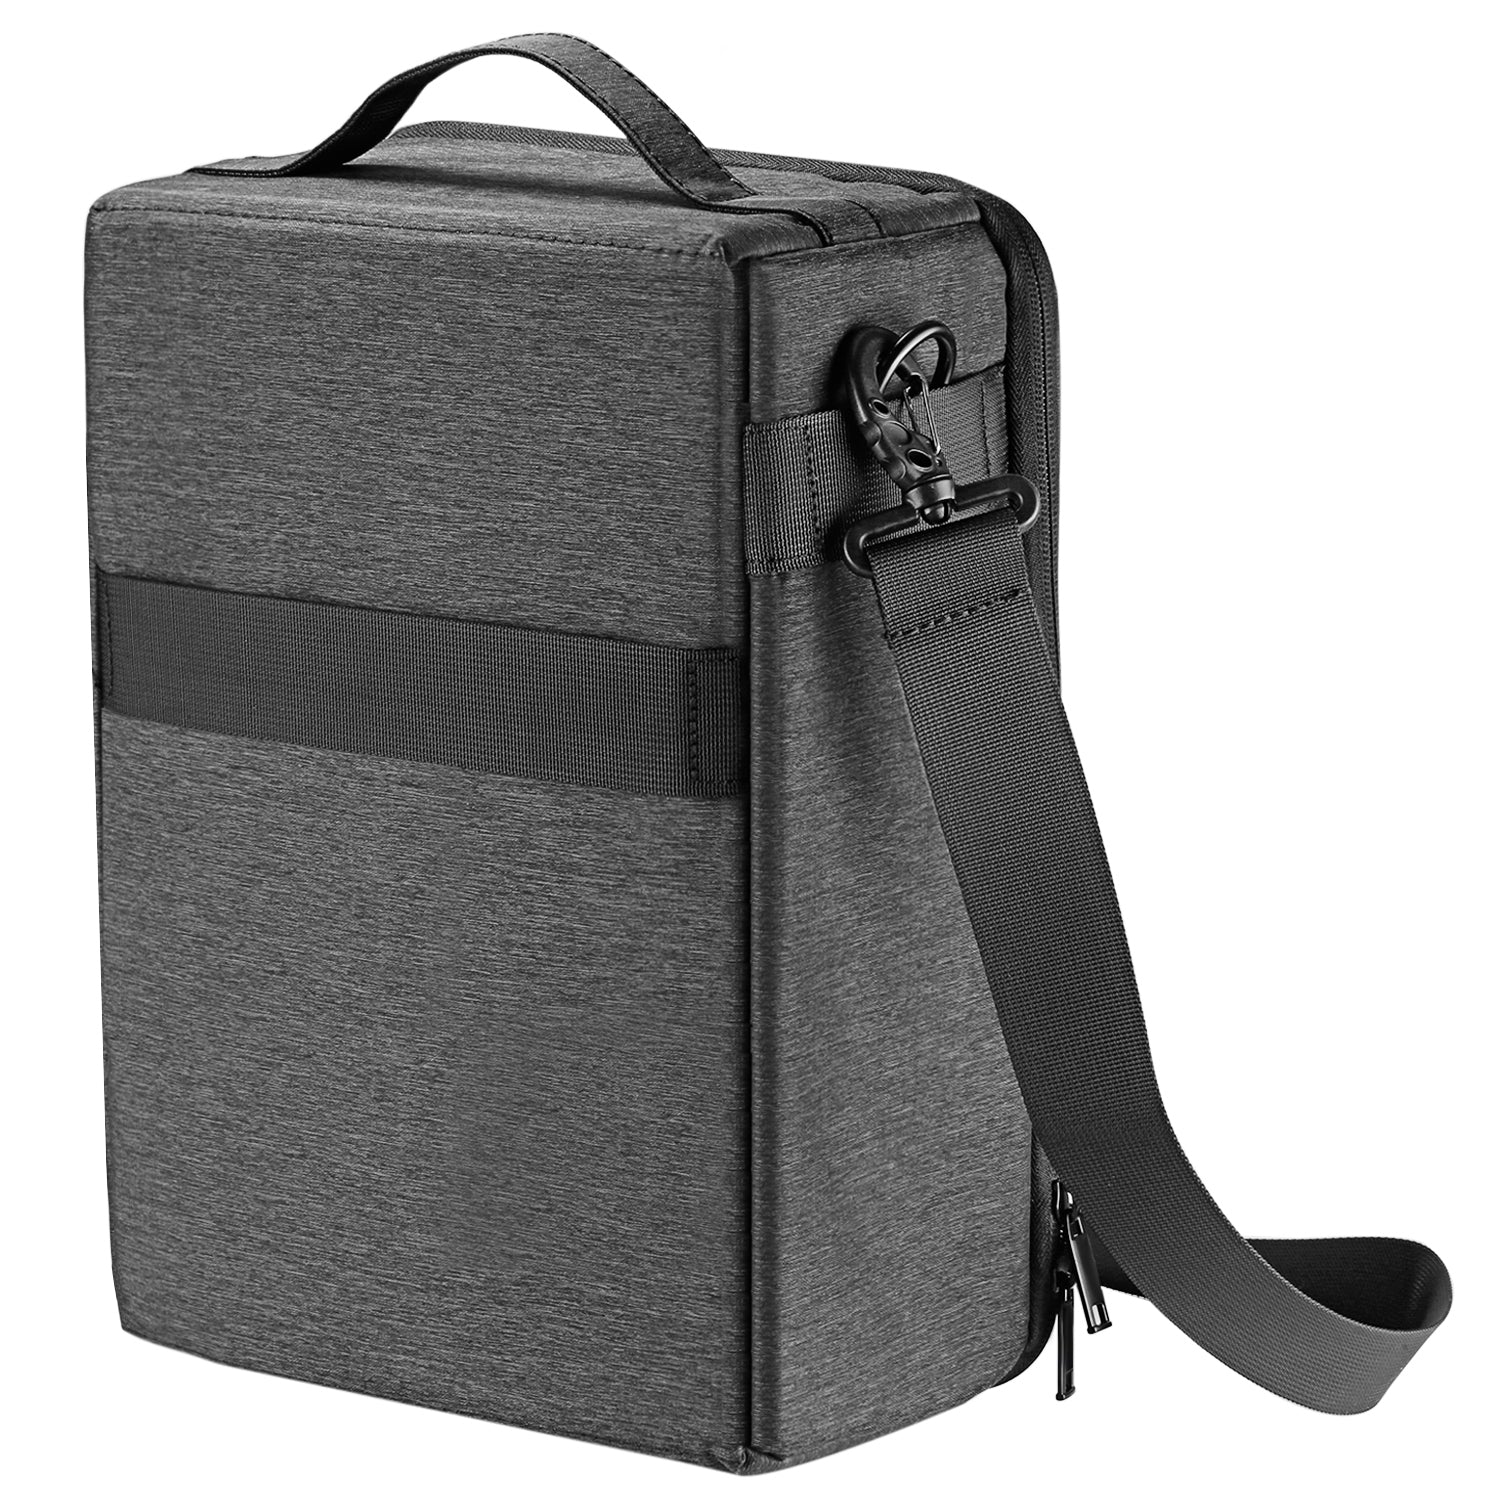 Neewer NW140S Waterproof Camera and Lens Storage Carrying Case